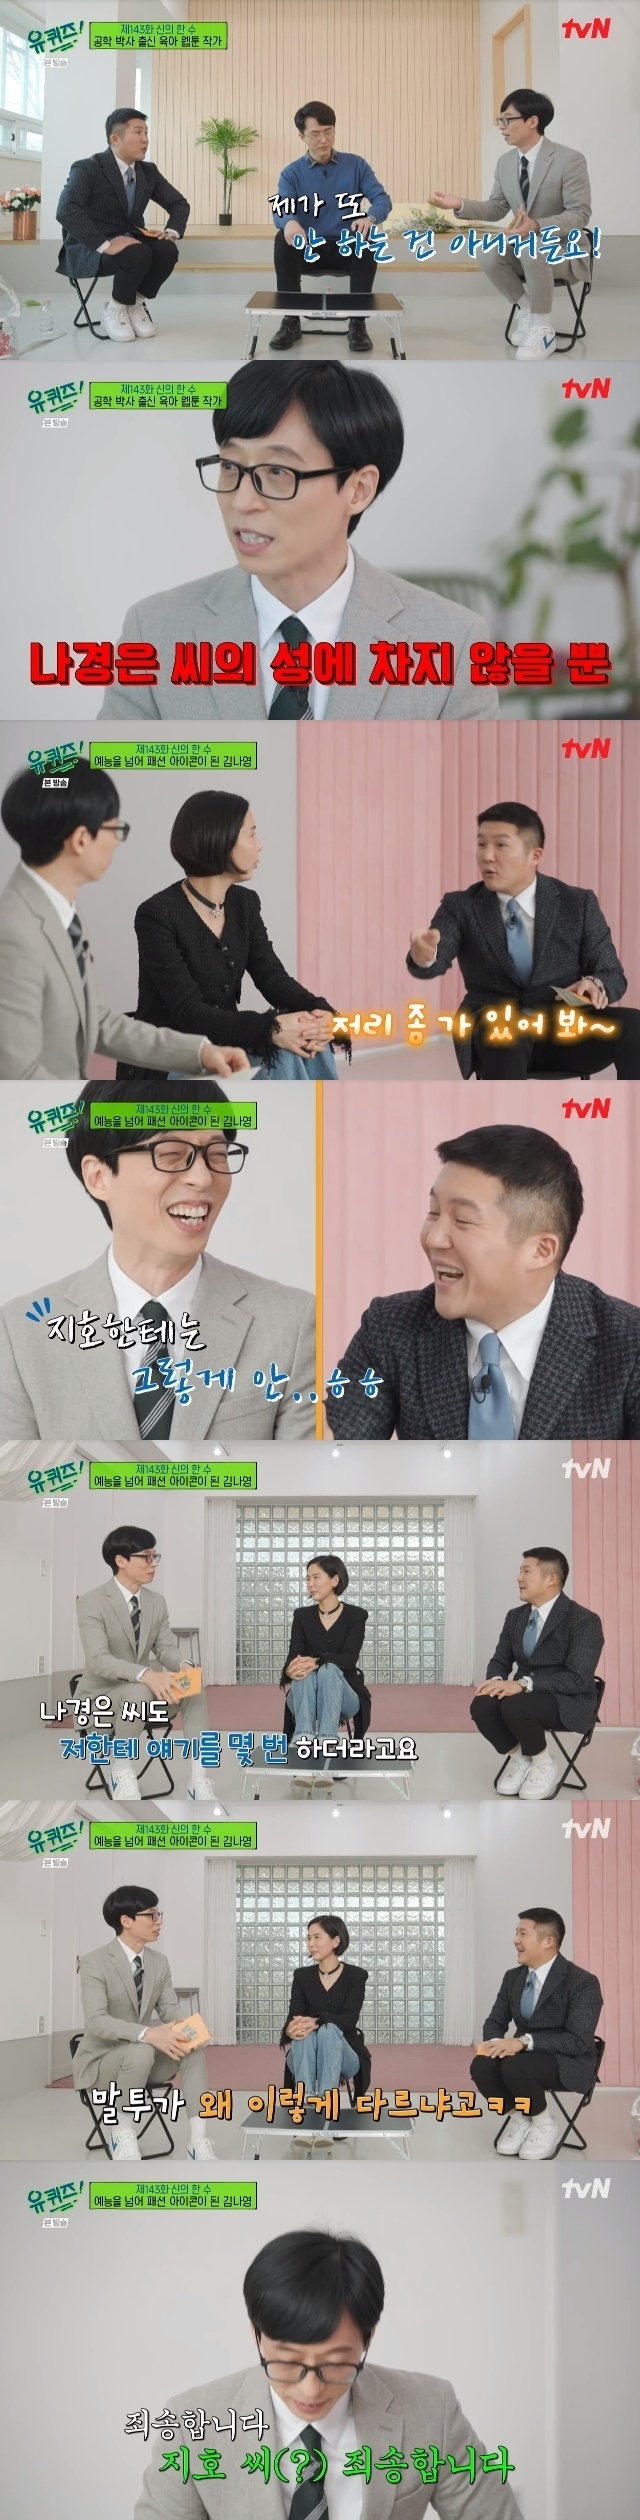 Yoo Jae-Suk has shared a parenting story as a father of two children.In the 143rd episode of tvN You Quiz on the Block (hereinafter referred to as You Quiz on the Block), which was broadcast on February 23, Yoo Jae-Suk had time to reflect on childcare.On this day, Yoo Jae-Suk agreed that I do not know if I do not really go through it when Lee Dae-yang, a webtoon writer who chose childcare with a doctorate in engineering,Yoo Jae-Suk said, When I work outside, Na Kyung-eun almost takes care of the child, and I am so sorry for that part, but I do not do it again.Ill tell you all the time, but Na is not in your name. I try my best.But I kept talking outside and spent a lot of energy and went home, for example.(Na Kyung-eun) should go quickly when he calls, but when he calls brother one more time, he is going (playing around), a little bit like that, he said.It is important to look at it a lot, but it is important to take it for an hour, an hour, to be trusted.If you call me, I do not leave it to you. OK, Ill go in.Yoo Jae-Suk said, I have to guarantee that time. I try hard to do that ... I have been asked questions and I have been confused.Yoo Jae-Suk continued to talk about childcare even when he met Kim Na-young, who is raising his two sons as a single mother.Yoo Jae-Suk commented that Kim Na-young wrote that every day I do childcare, I check that I am a bad person. I also have a lot of self-reliantness.Kim Na-young said that the most common behavior for his two sons is to count the numbers before counting one or two or three numbers. I have a compromise.I do not want to do it for three years, so I count to 20. Jo Se-ho said, My brother was talking to me, but he did not say Na-eun, go away. Na-eun, Father. Stay away.So Na-eun said, I got it. He told Yoo Jae-Suk how to raise children.Yoo Jae-Suk said, Thats what Na-eun does. He doesnt do that to JiHo. Na Kyung-eun told me a few times.Why is the tone so different? He revealed himself, I am sorry, Mr. JiHo. He apologized to his son and laughed.